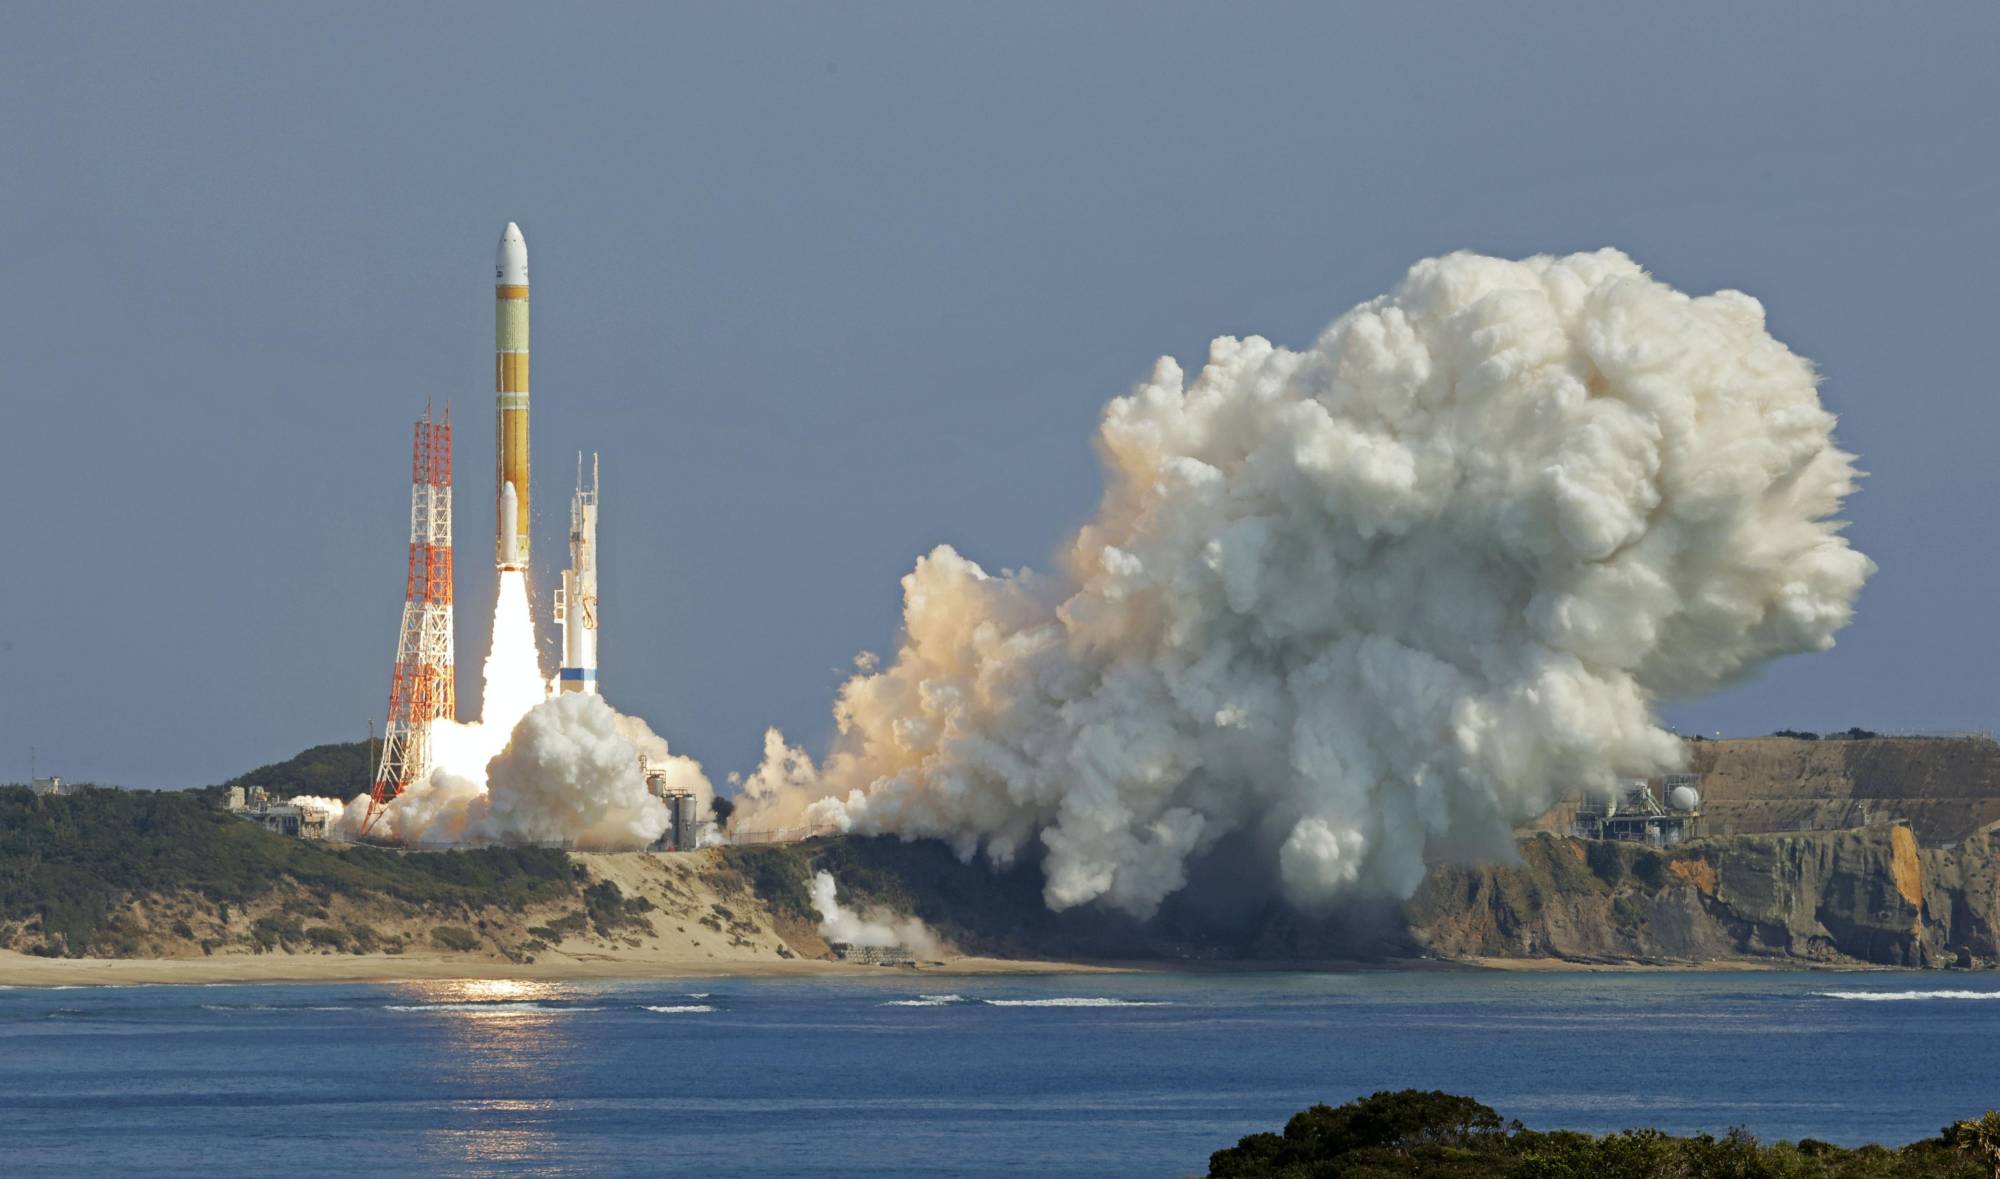 Japan's flagship H3 rocket lifts off from Kagoshima Prefecture on March 7. The rocket was later ordered to self-destruct after an engine failed to ignite. | KYODO